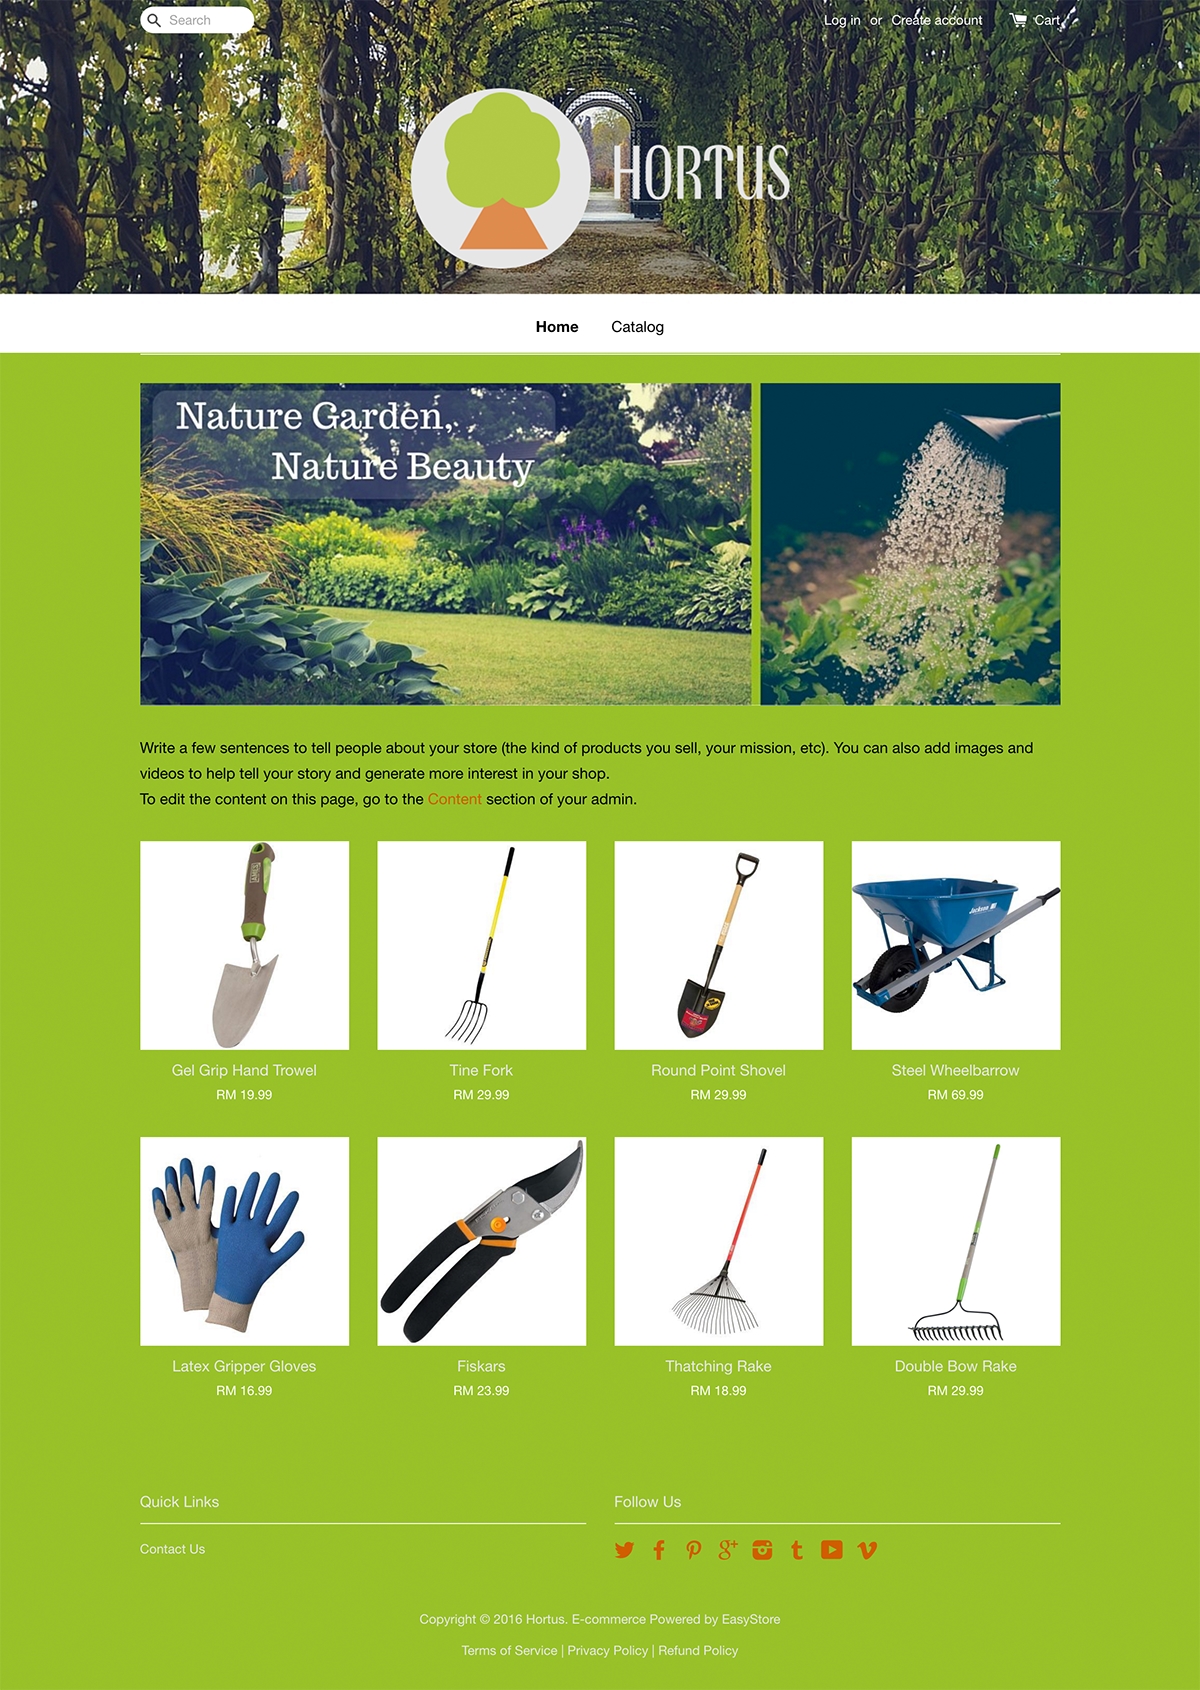 Hortus | EasyStore themes